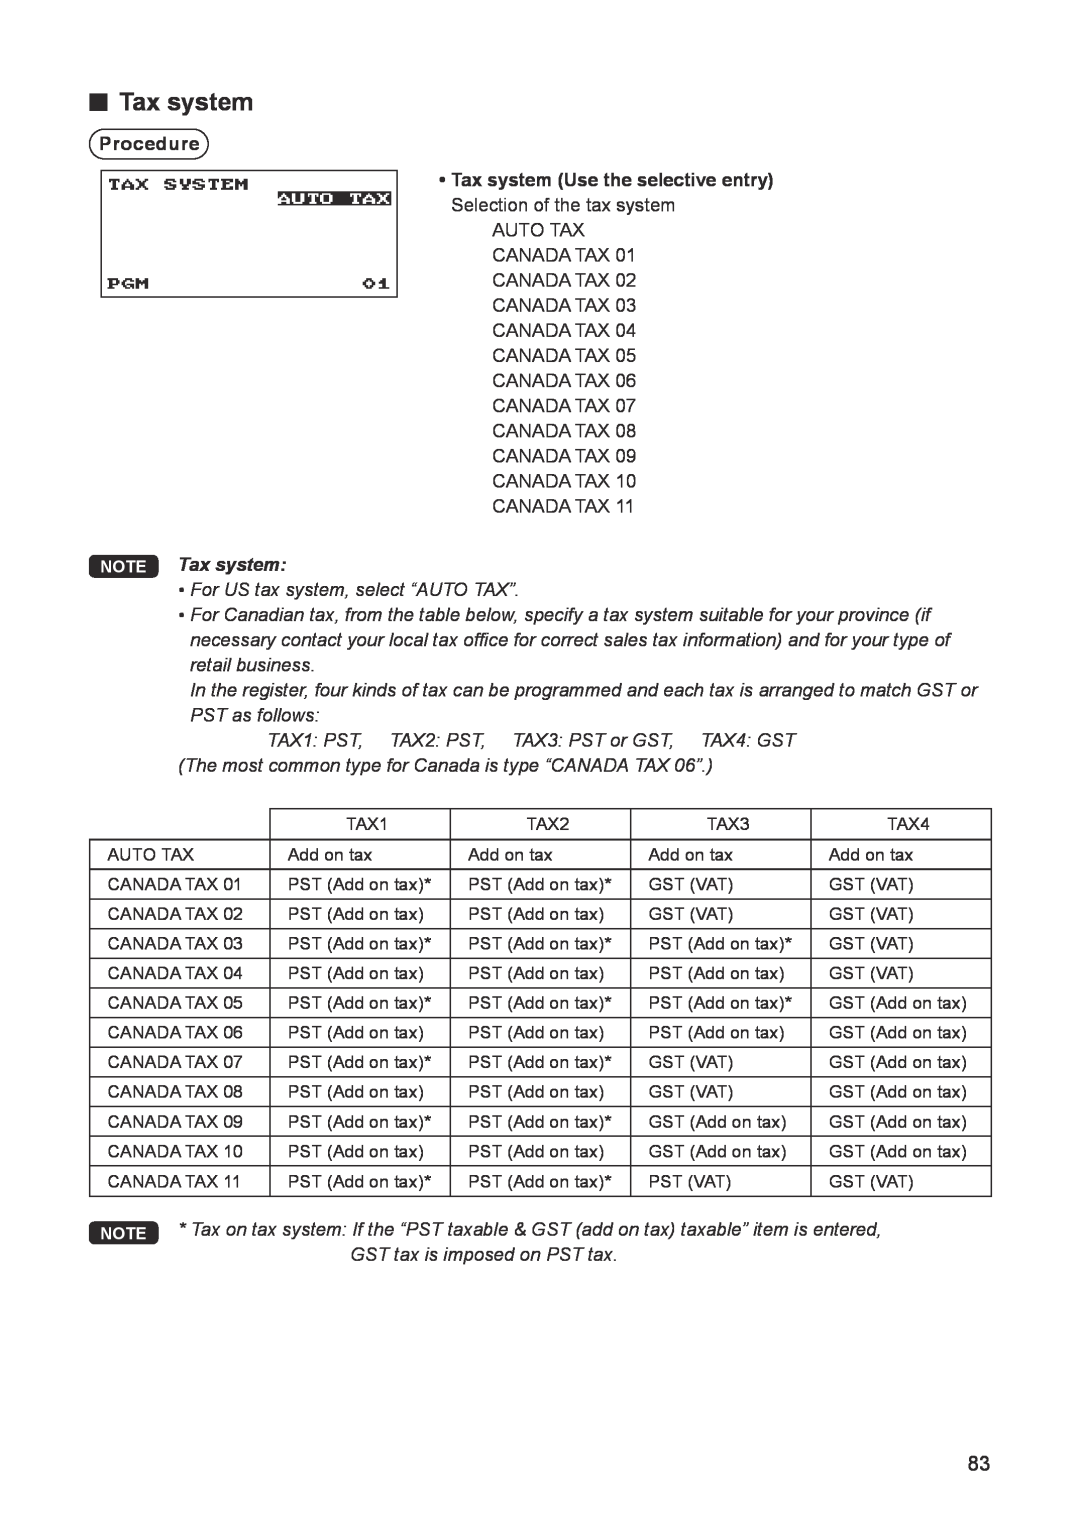 Sharp ER-A347A instruction manual NOTE Tax system, For US tax system, select “AUTO TAX”, PST as follows 